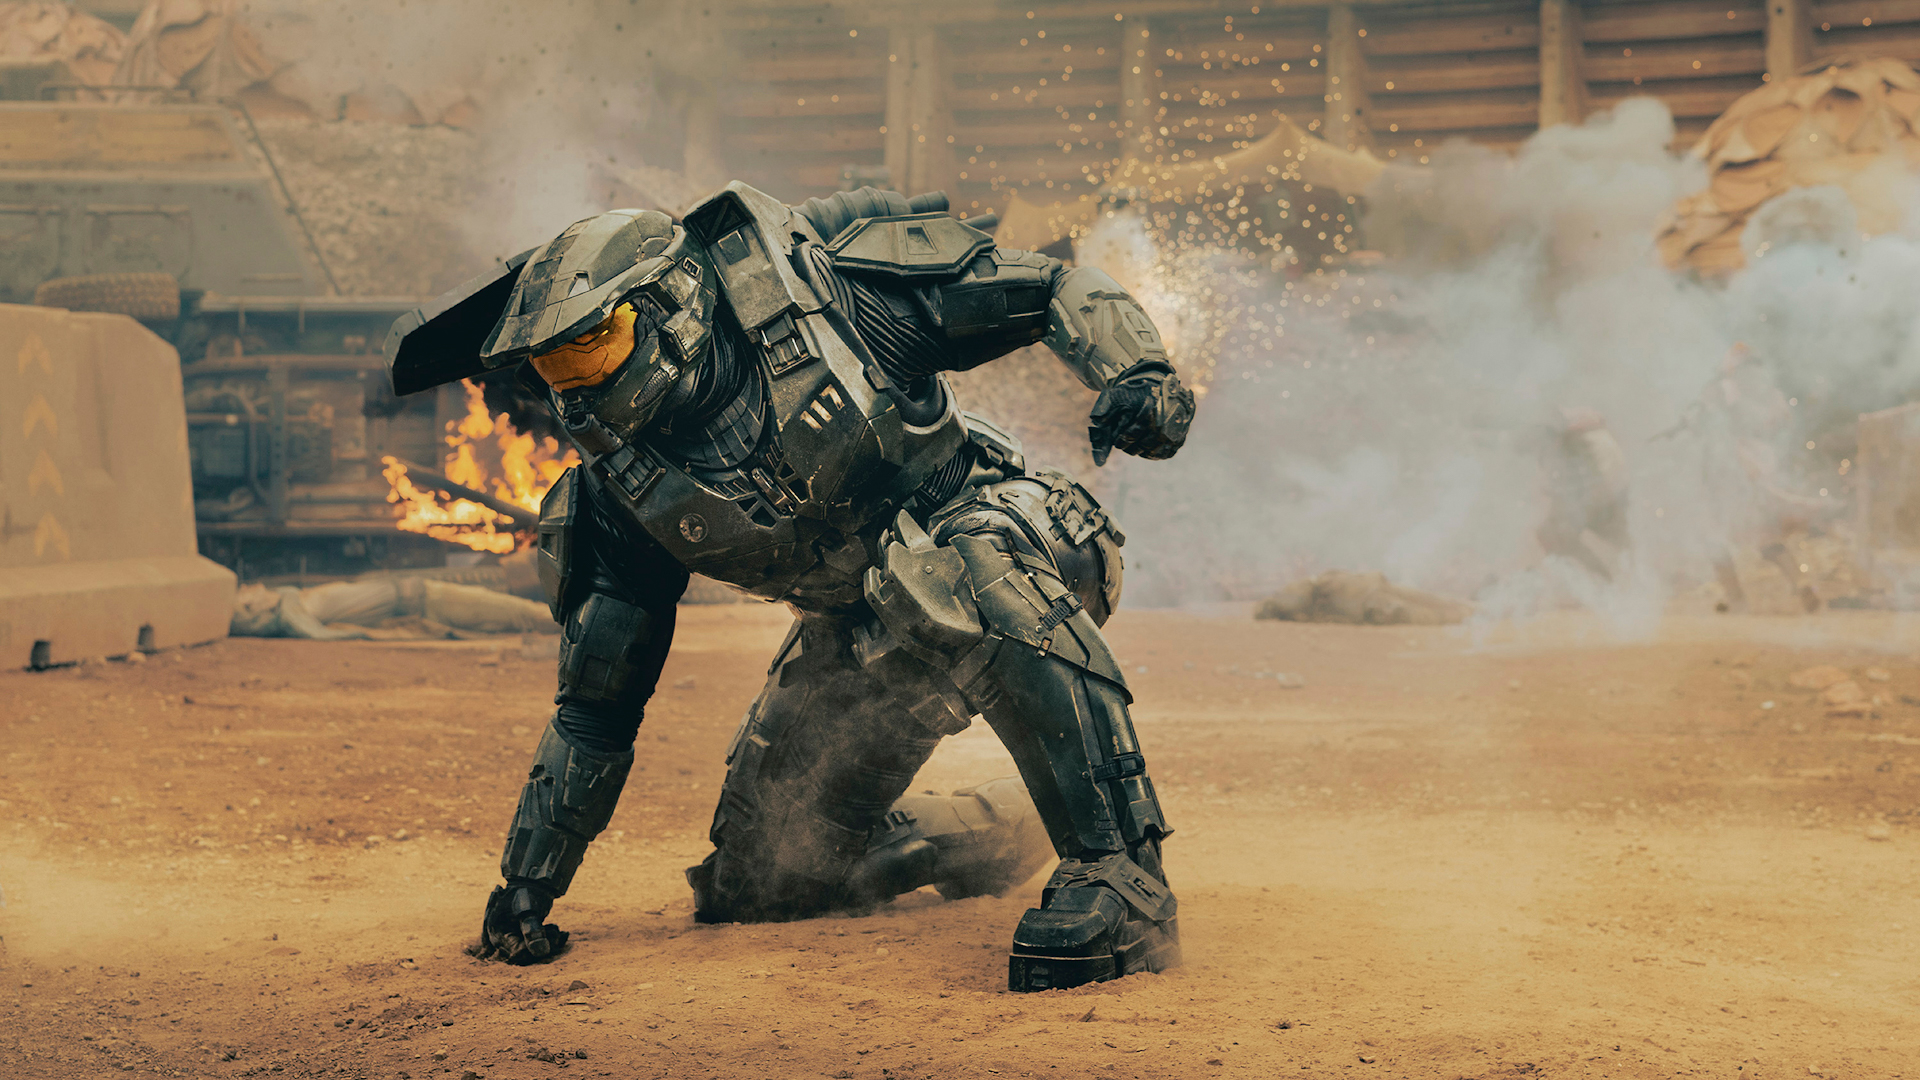 Halo”, the series based on the iconic video game Master Chief, was released  - Infobae